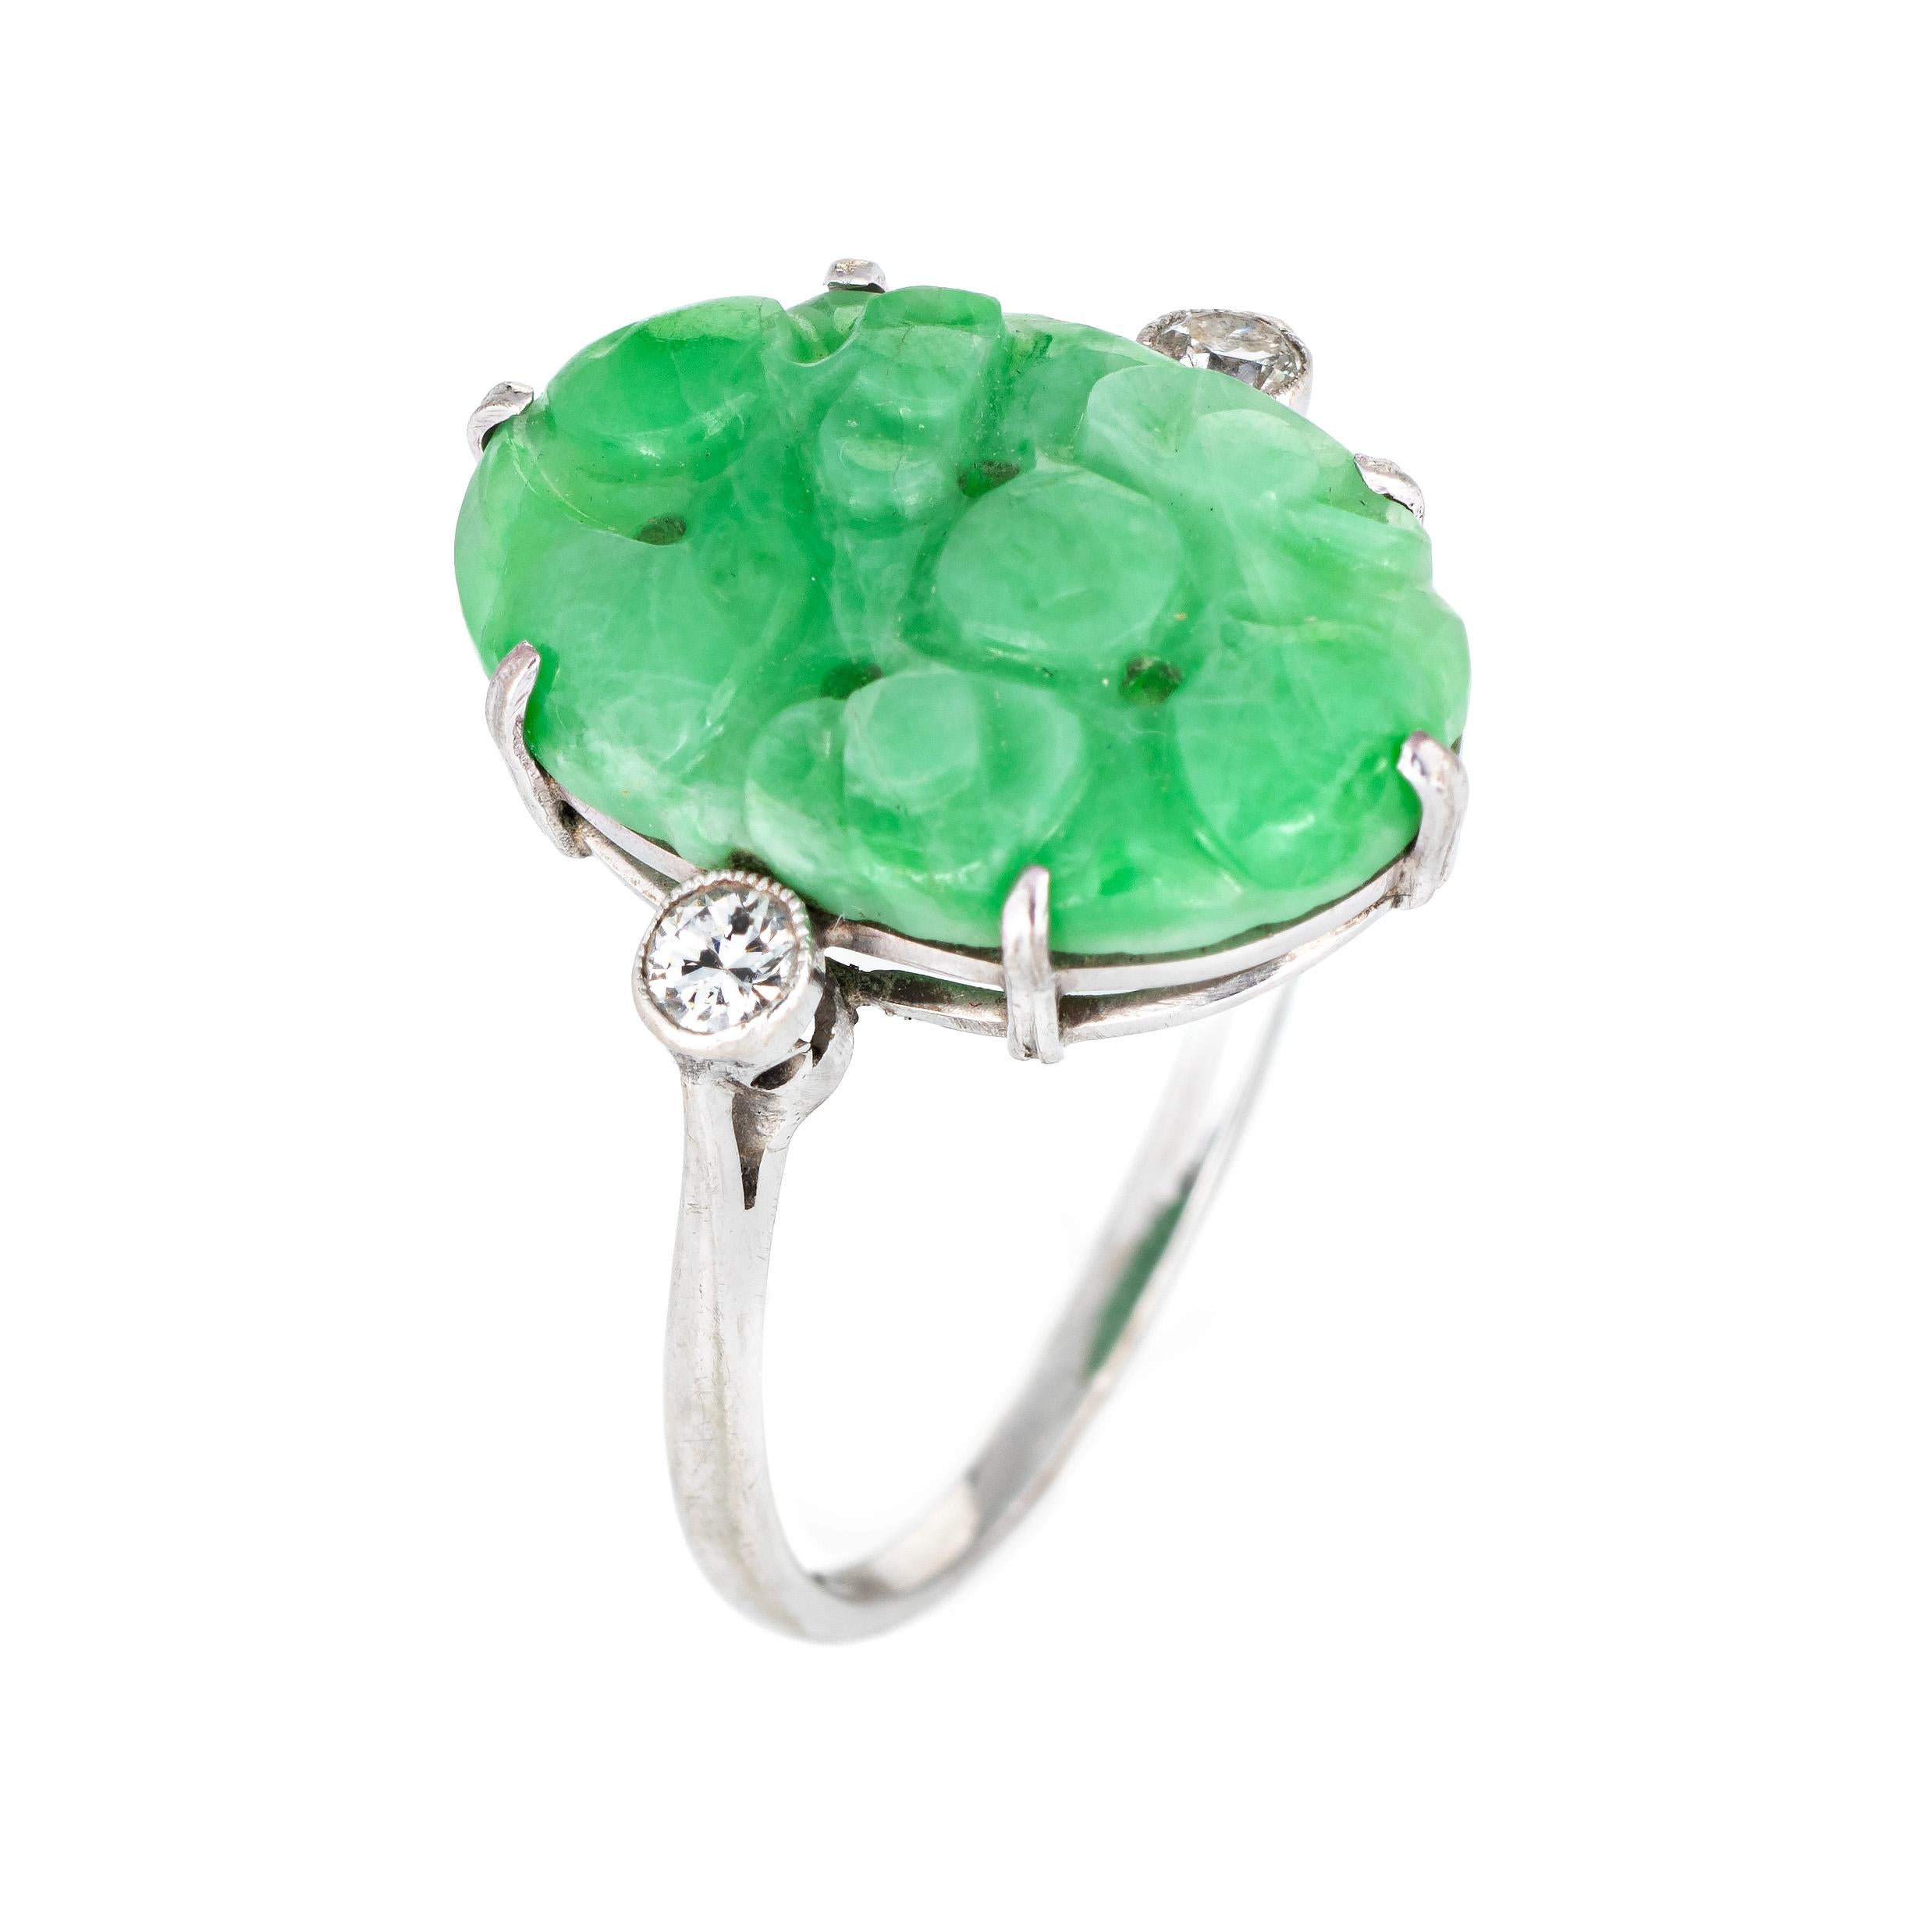 Stylish vintage carved jade & diamond cocktail ring (circa 1950s to 1960s) crafted in 18 karat white gold. 

Carved jade measures 18mm x 12.5mm, accented with two estimated 0.06 round brilliant cut diamonds. The total diamond weight is estimated at